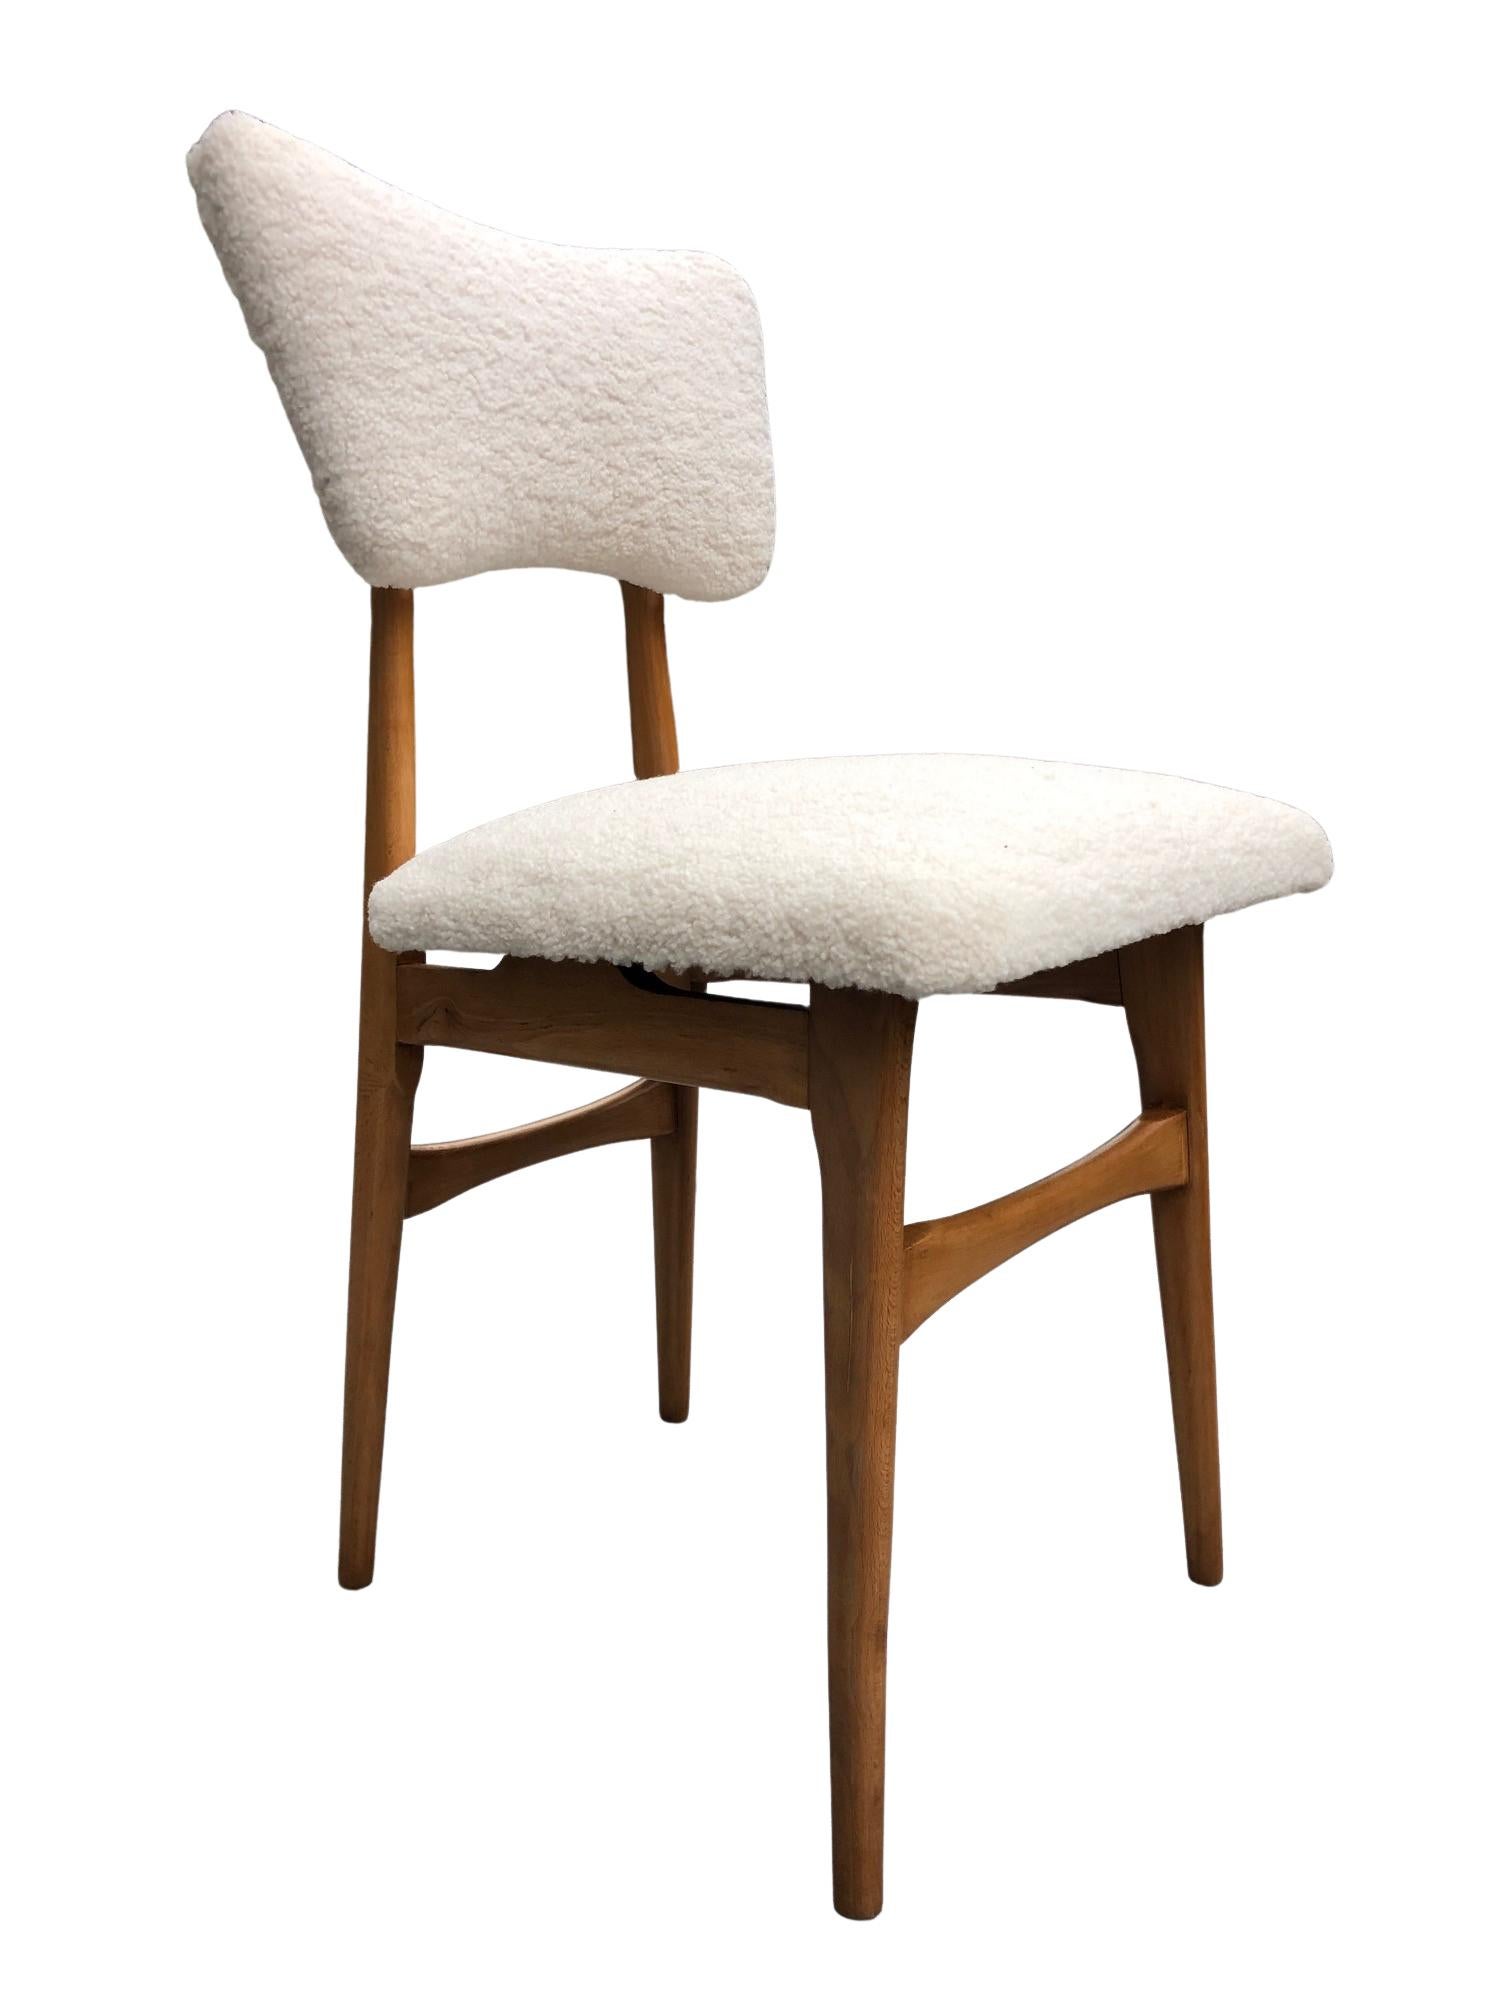 Midcentury Cream Bouclé and Wood Dining Chair, Europe, 1960s For Sale 7